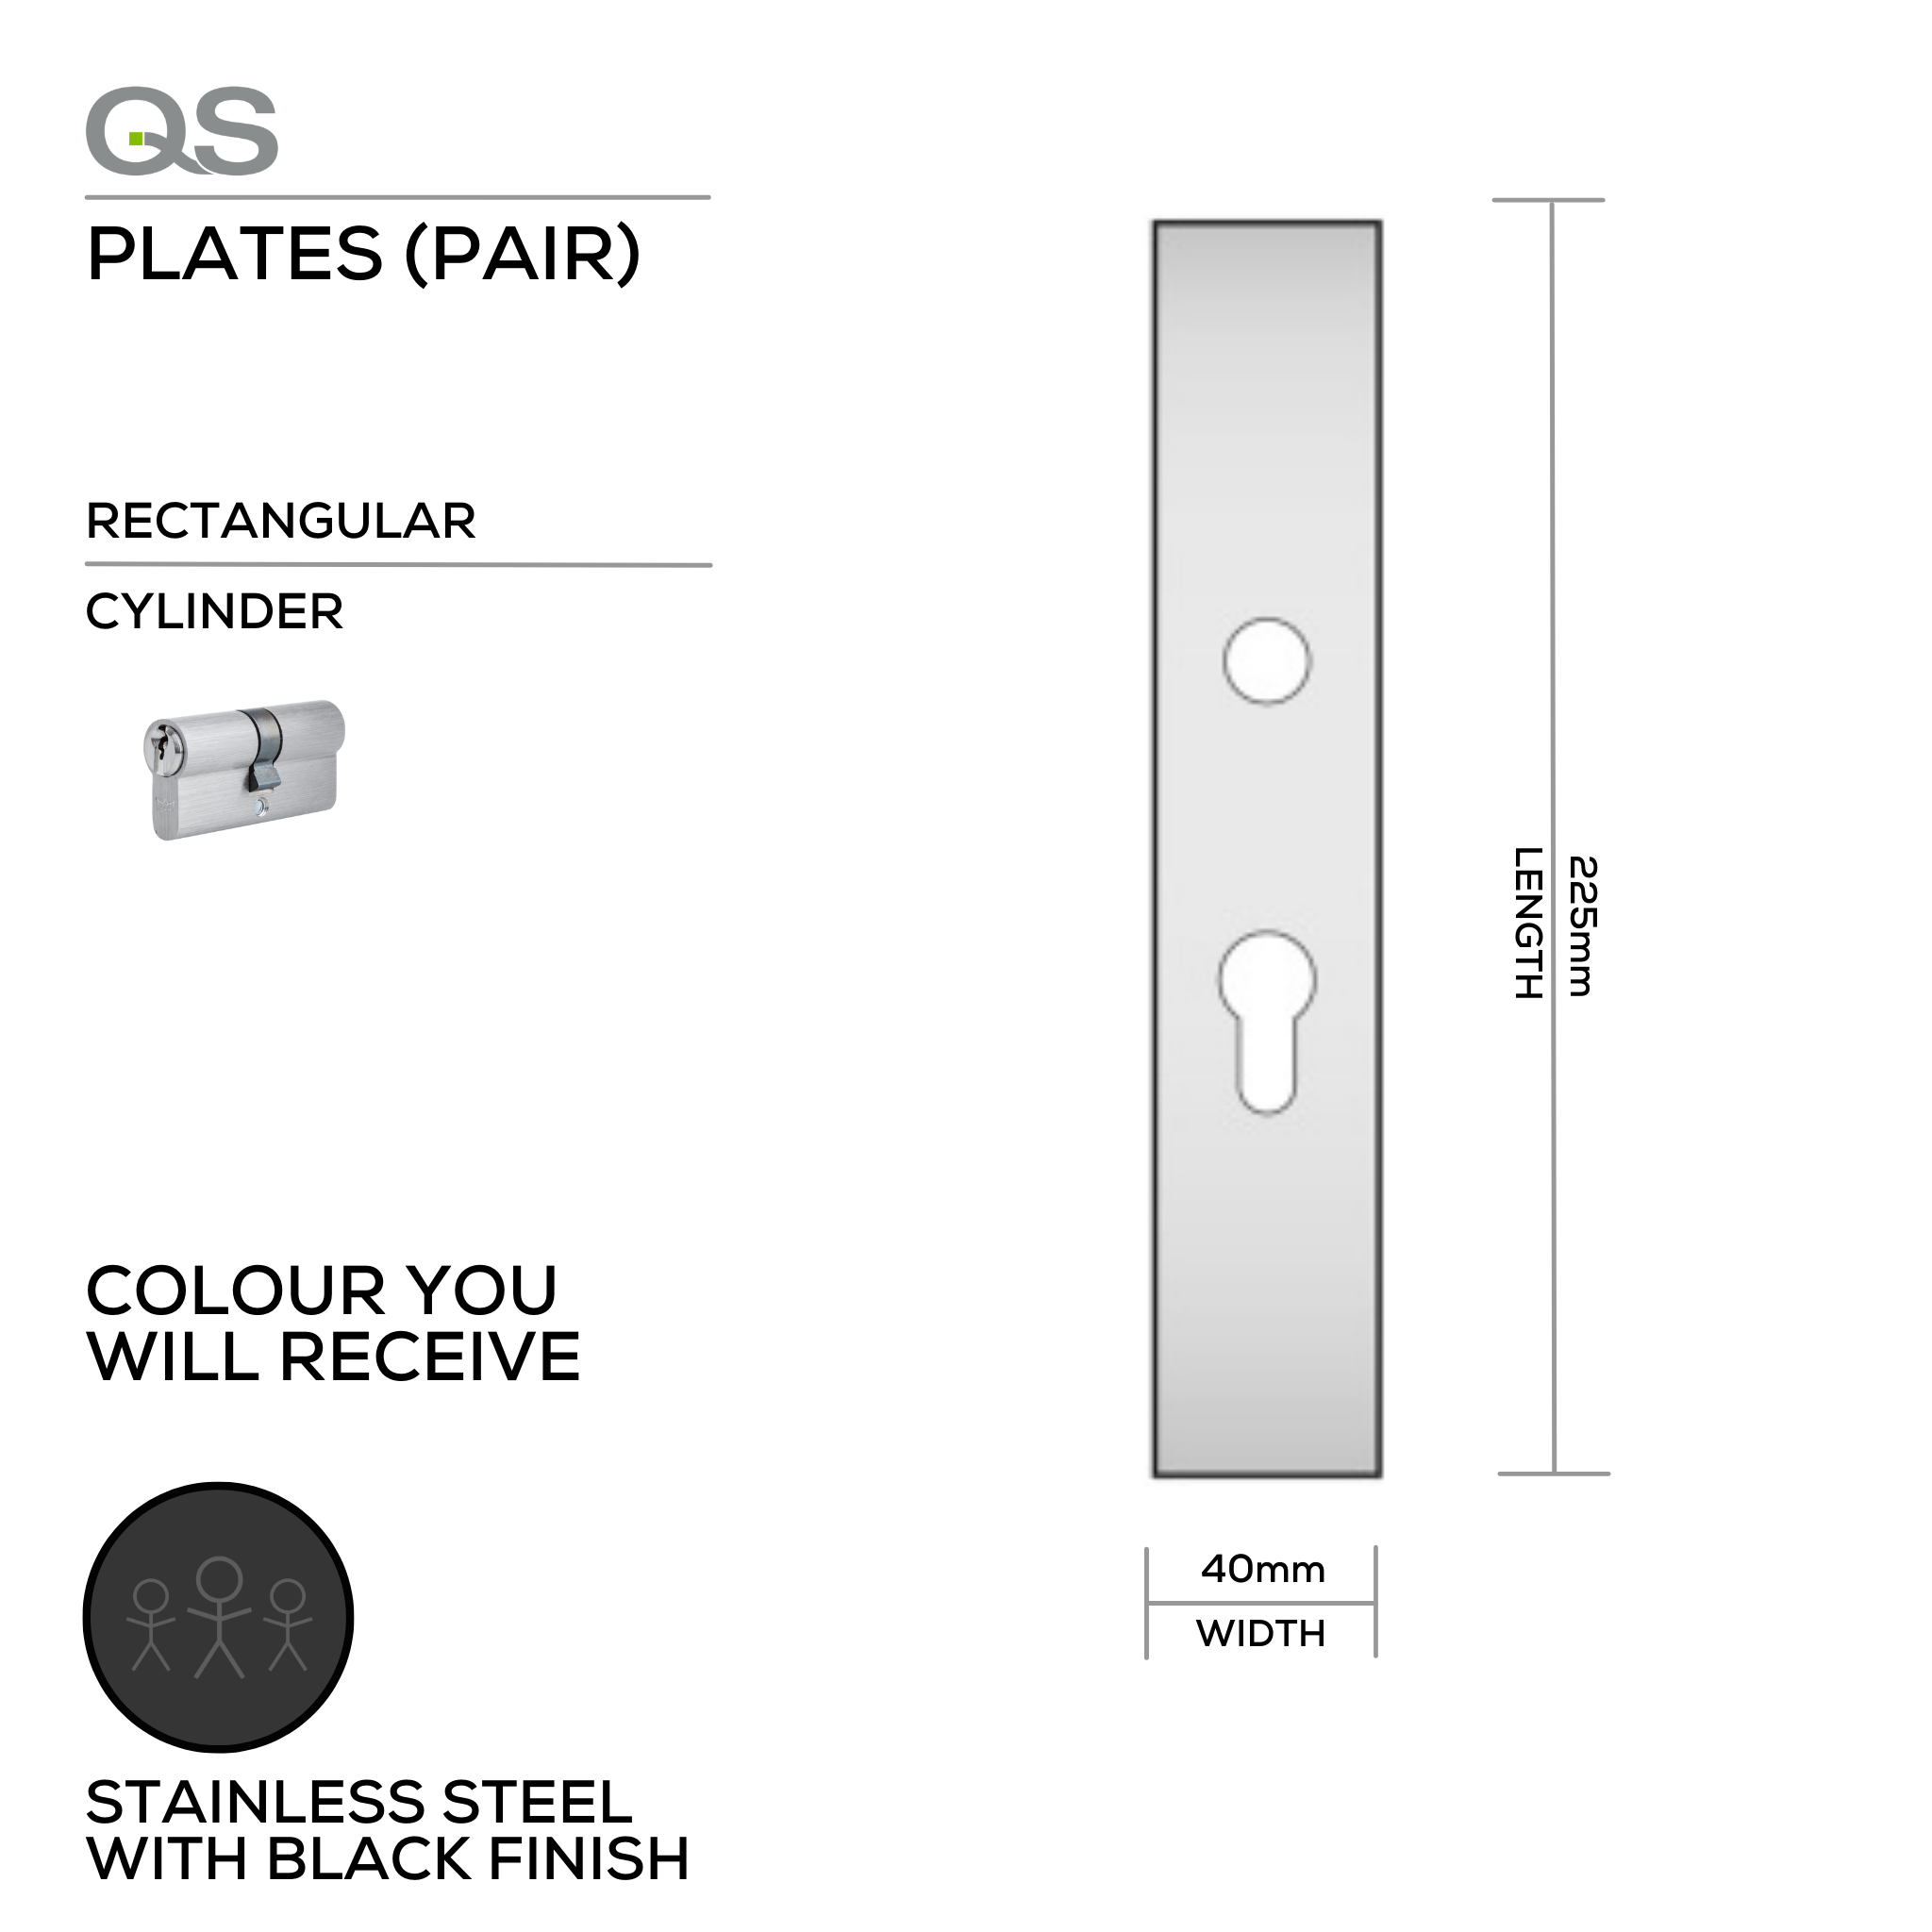 QS4429 CYL BLACK, Plate, Cylinder, Rectangular, 65 or 85mm Centres, 225mm (l) x 40mm (w), Supplied without QS Handle, Black Stainless Steel, QS